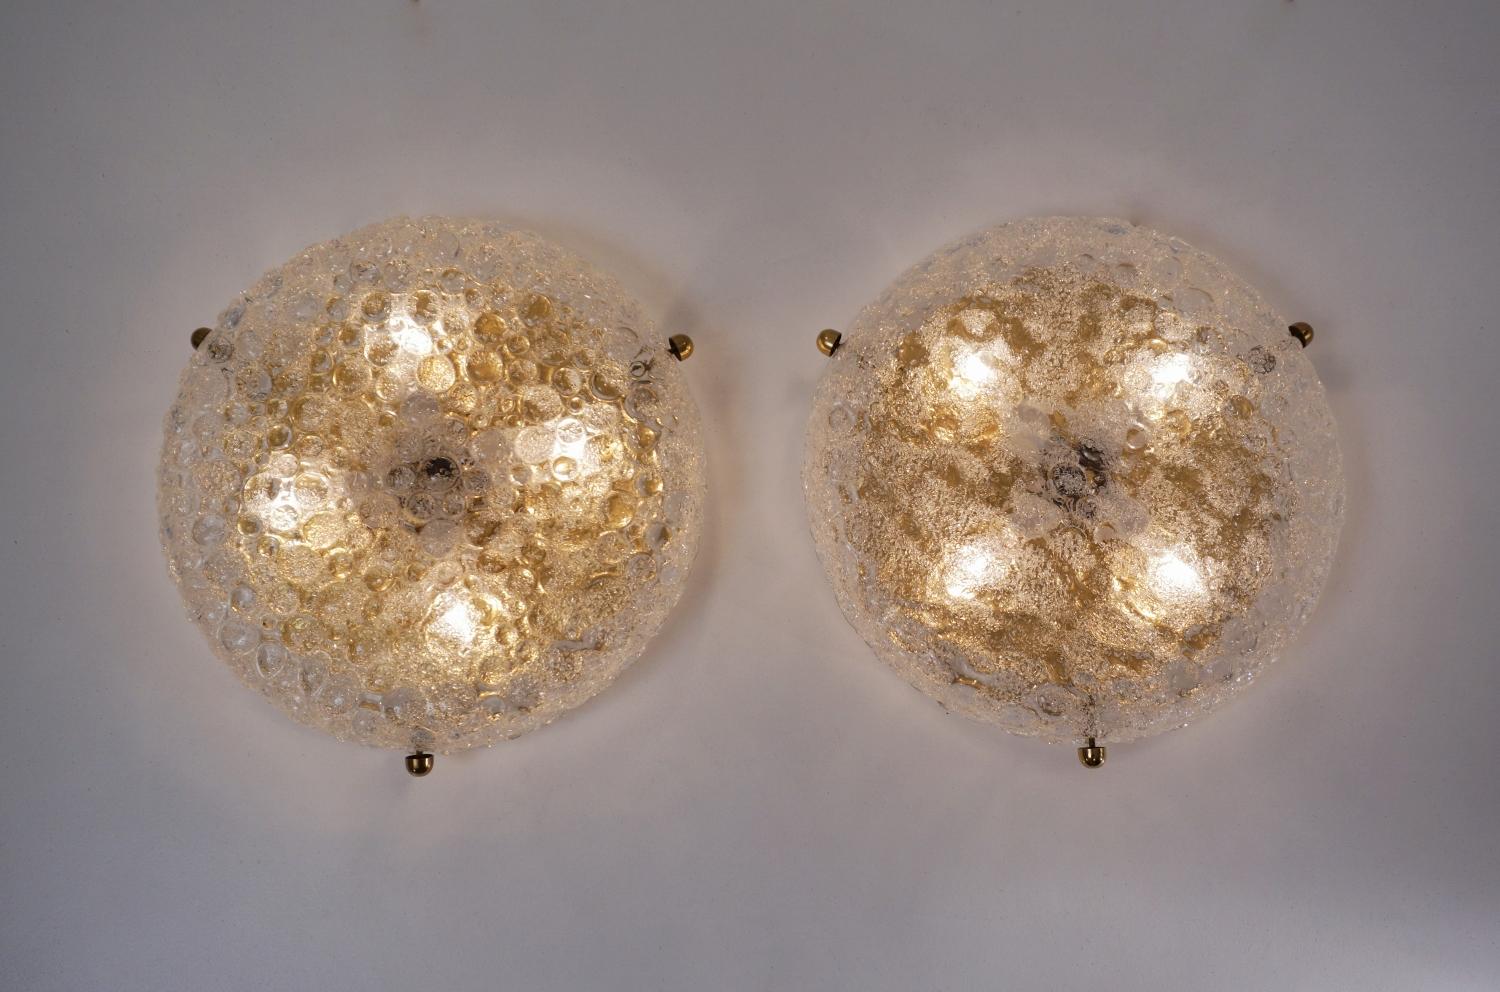 Pair of brass flush lights with glass shade by Hillebrand Lighting, circa 1970s, German.
Both lights have been thoroughly cleaned respecting the vintage patina. Newly rewired, earthed, in full working order and ready to install. Light bulbs